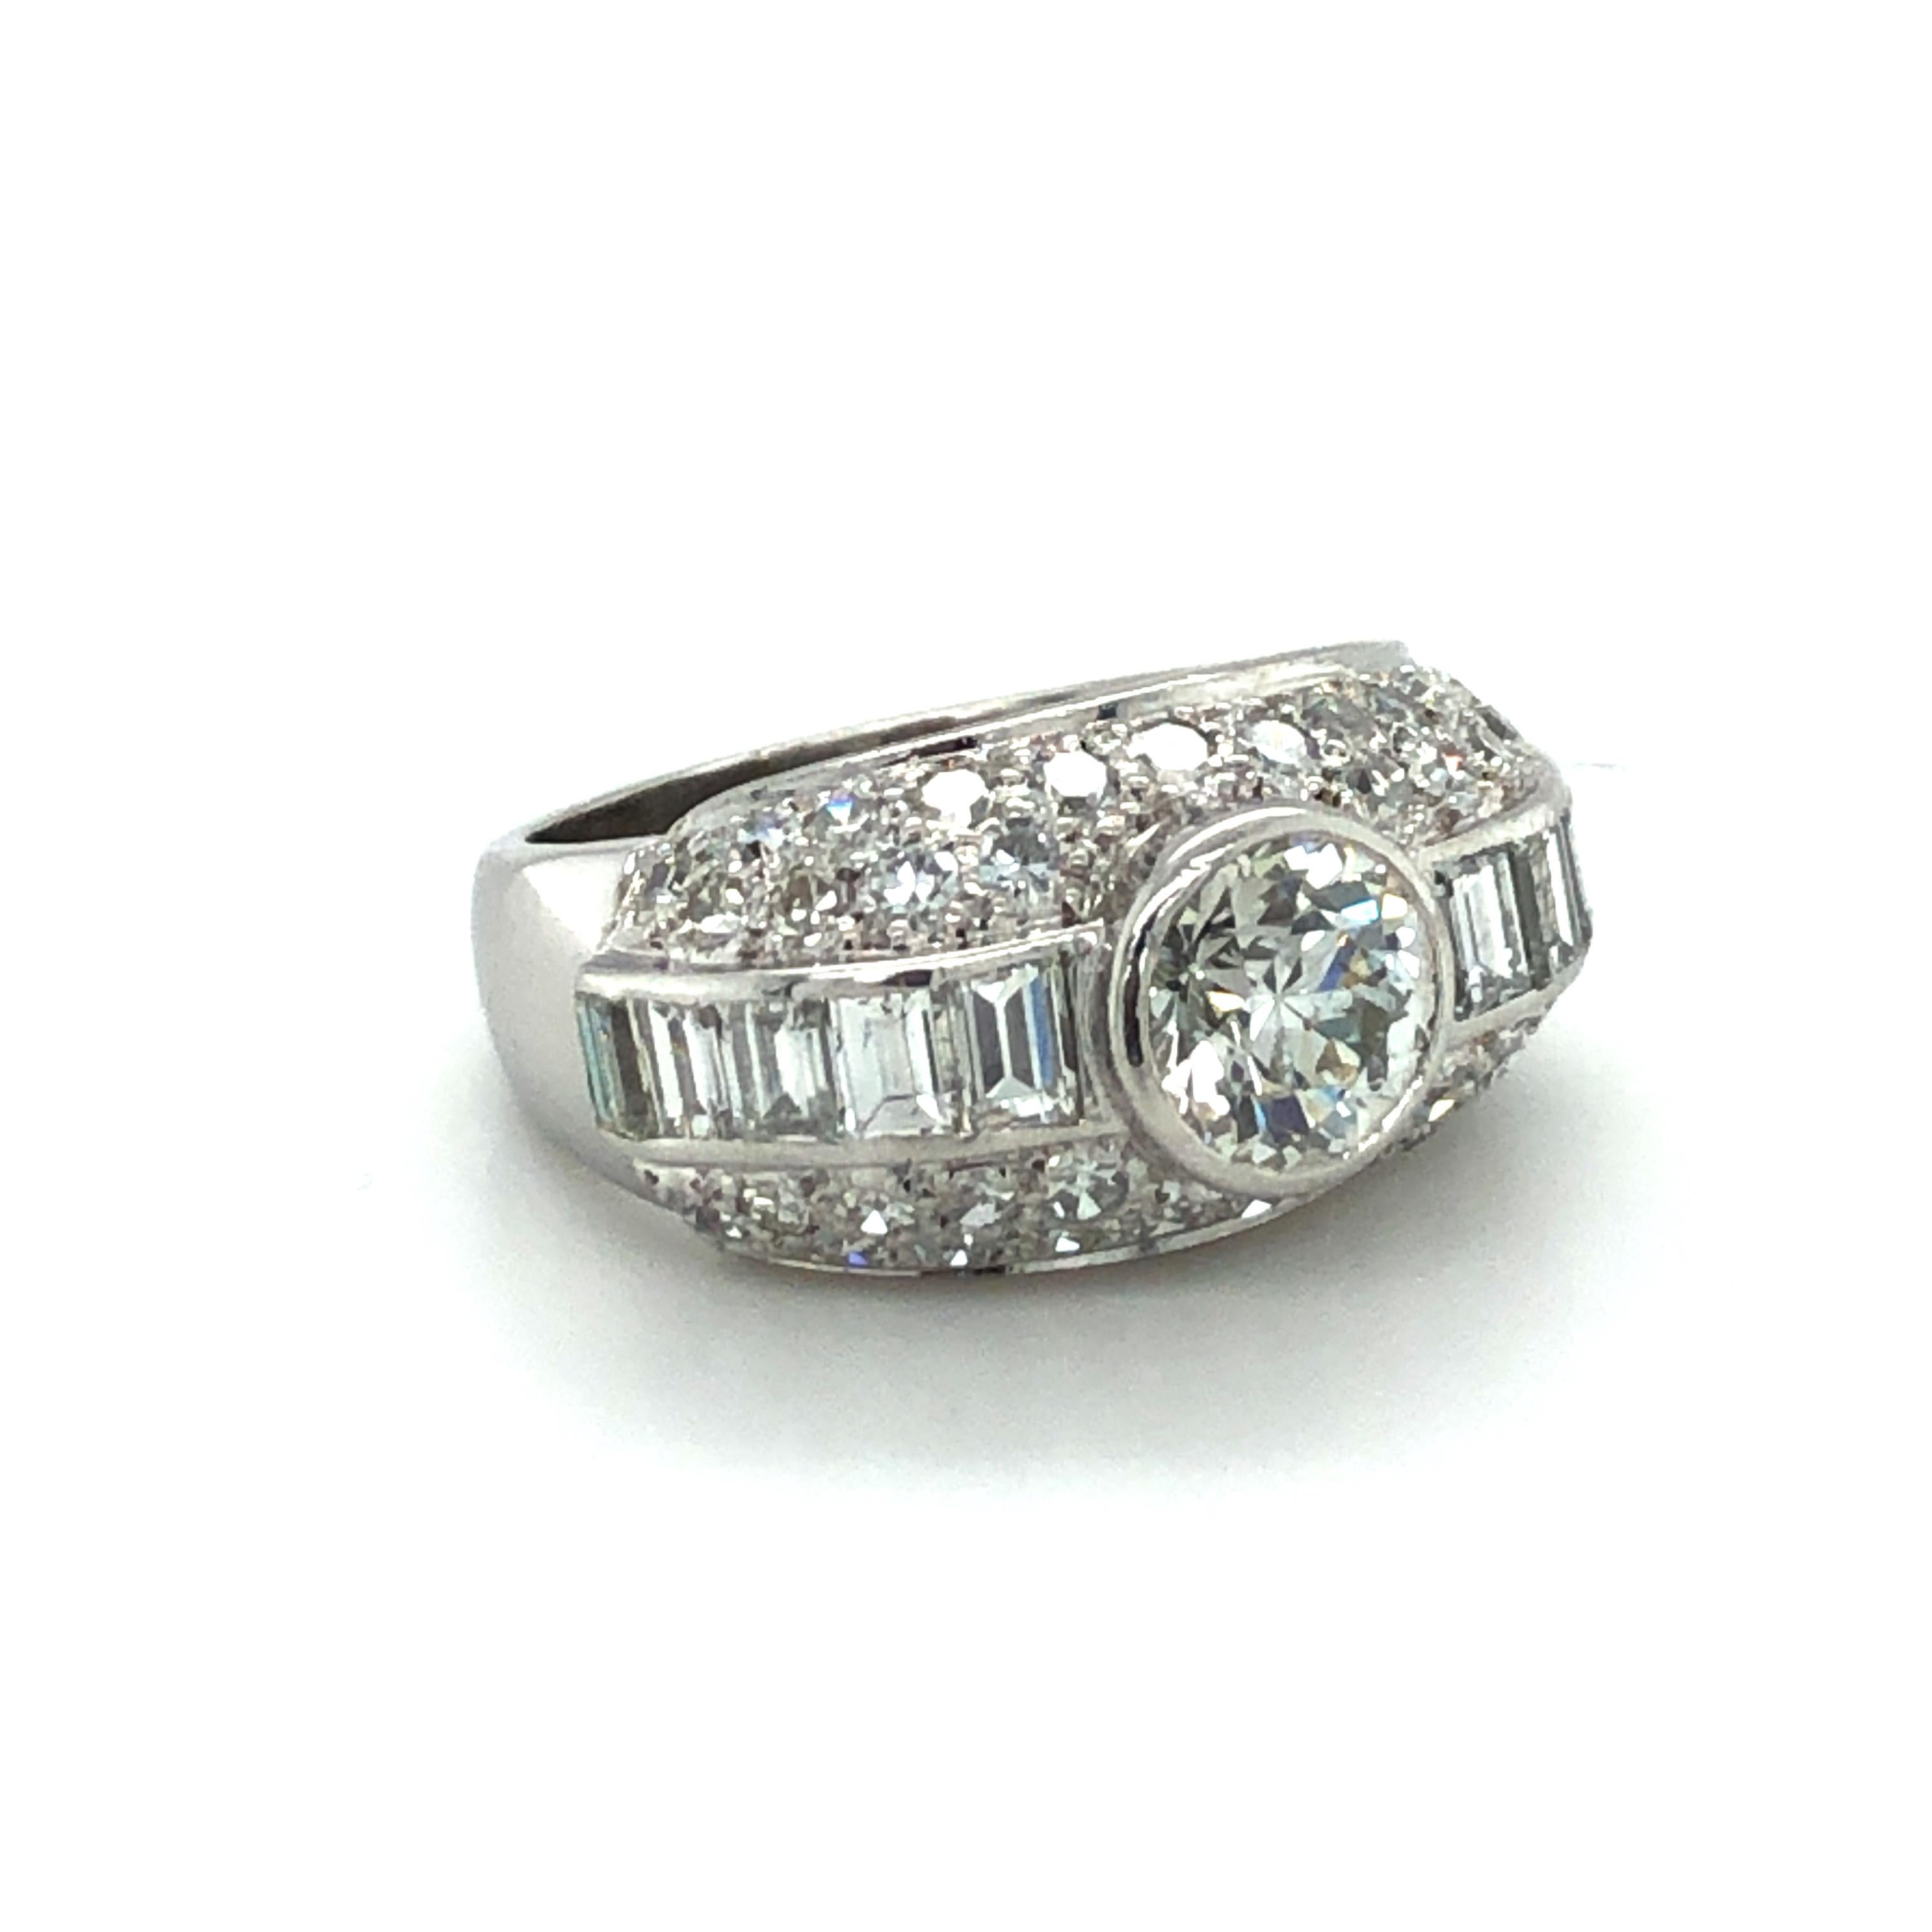 This beautiful Art Deco style ring in platinum 950 is set with a dazzling Old European cut diamond of approximately 1.05 carats with G/H colour and si2 clarity. Due to its high crown and small table facet, this diamond shows an extraordinary fire.